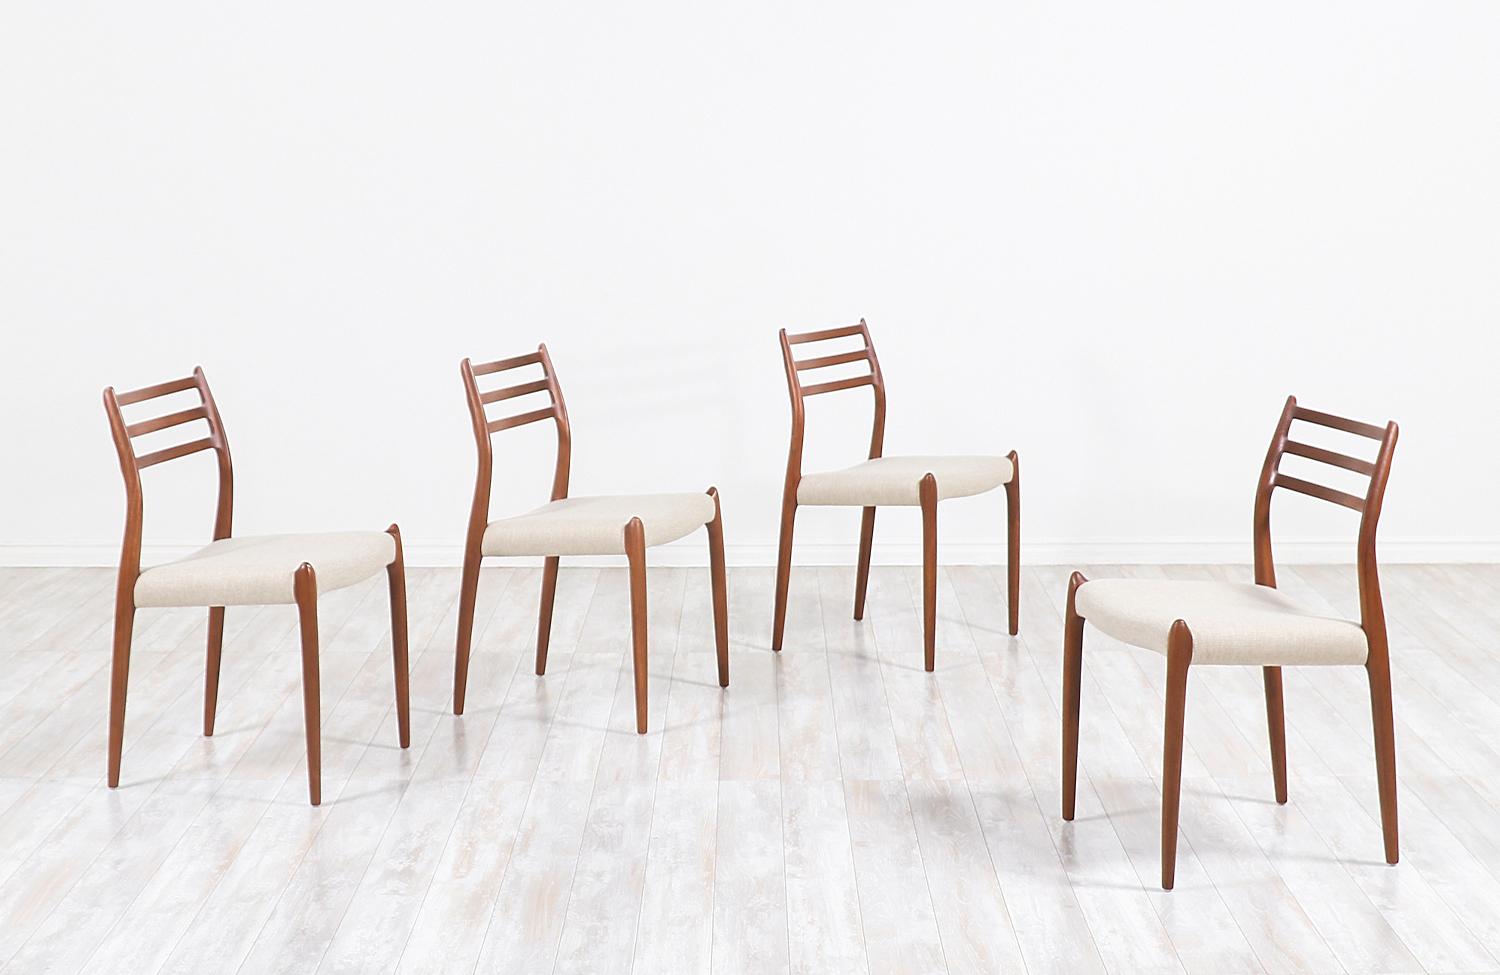 Set of four modern dining chairs designed by Niels O. Møller for J.L. Møllers in Denmark, circa 1960s. All four chairs feature an ergonomic design and are comprised of solid walnut wood with new light tweed upholstery and high-density foam cushions